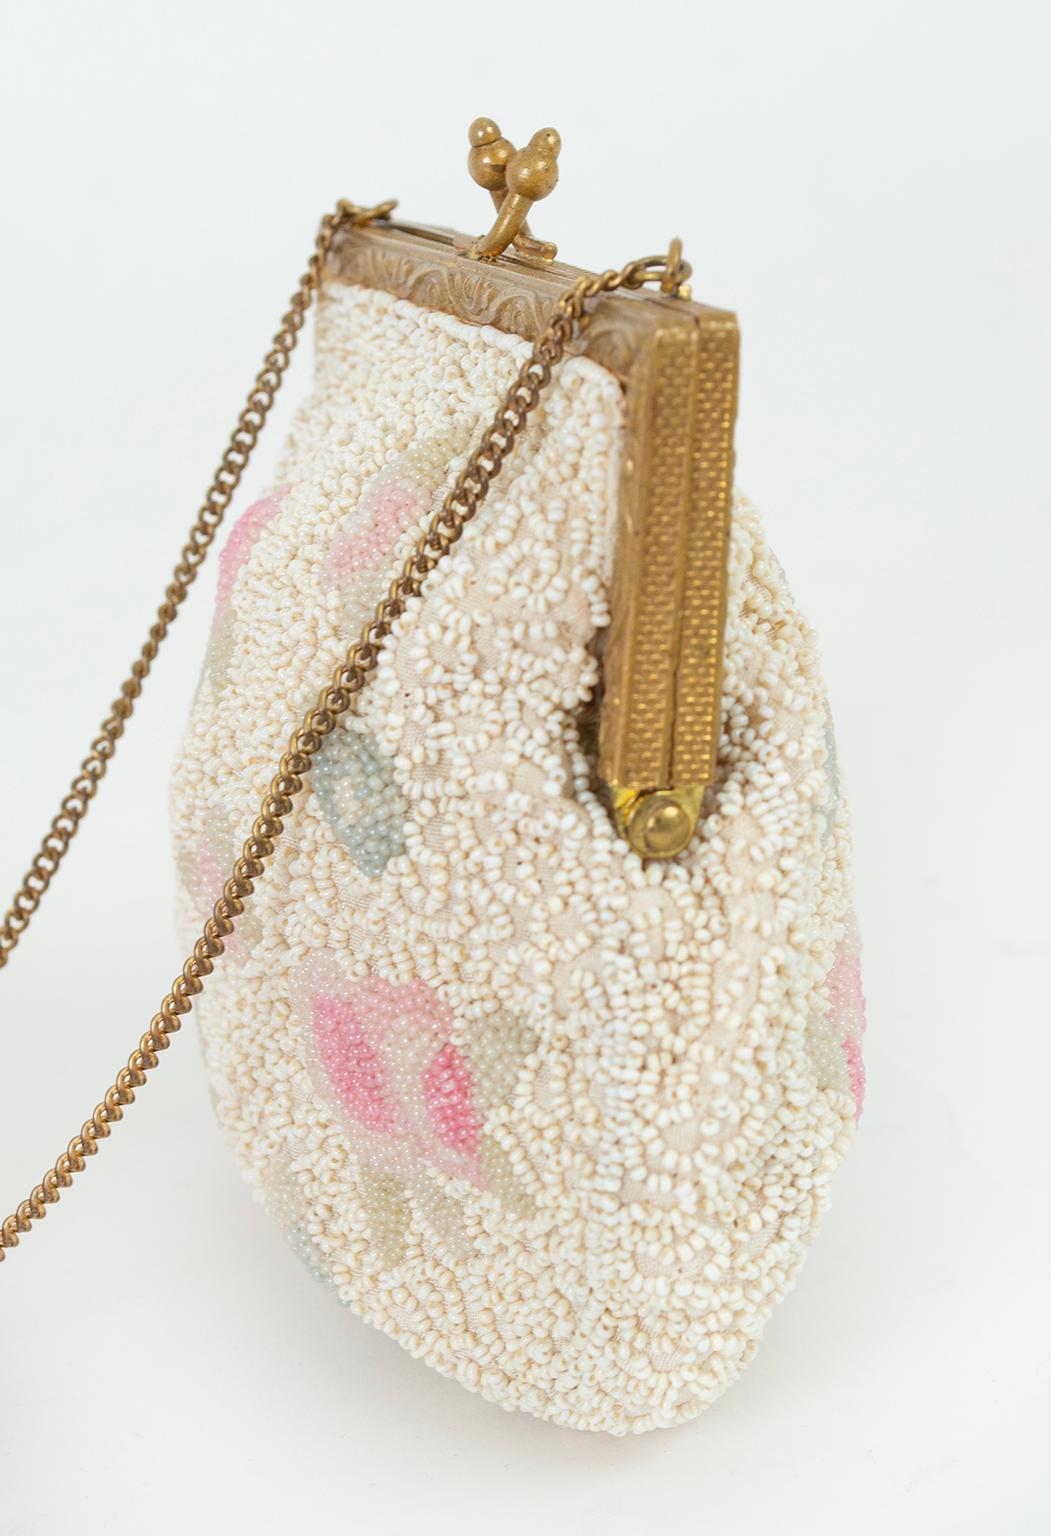 Longchamps Paris Ivory Floral Micro Bead Evening Bag w Chain Handle, 1950s In Good Condition For Sale In Tucson, AZ